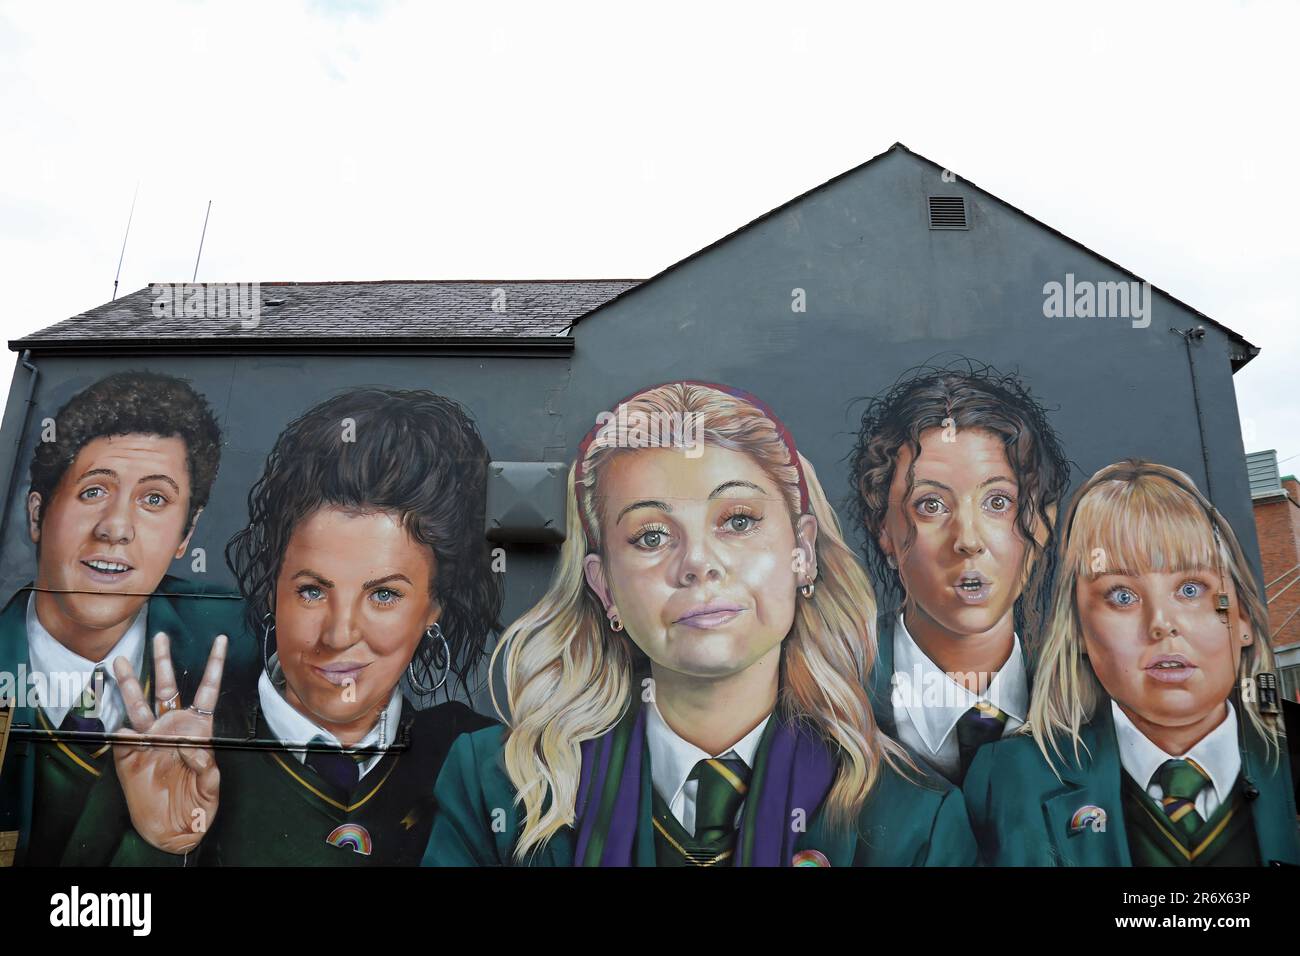 Derry Girls Mural in Londonderry Stock Photo